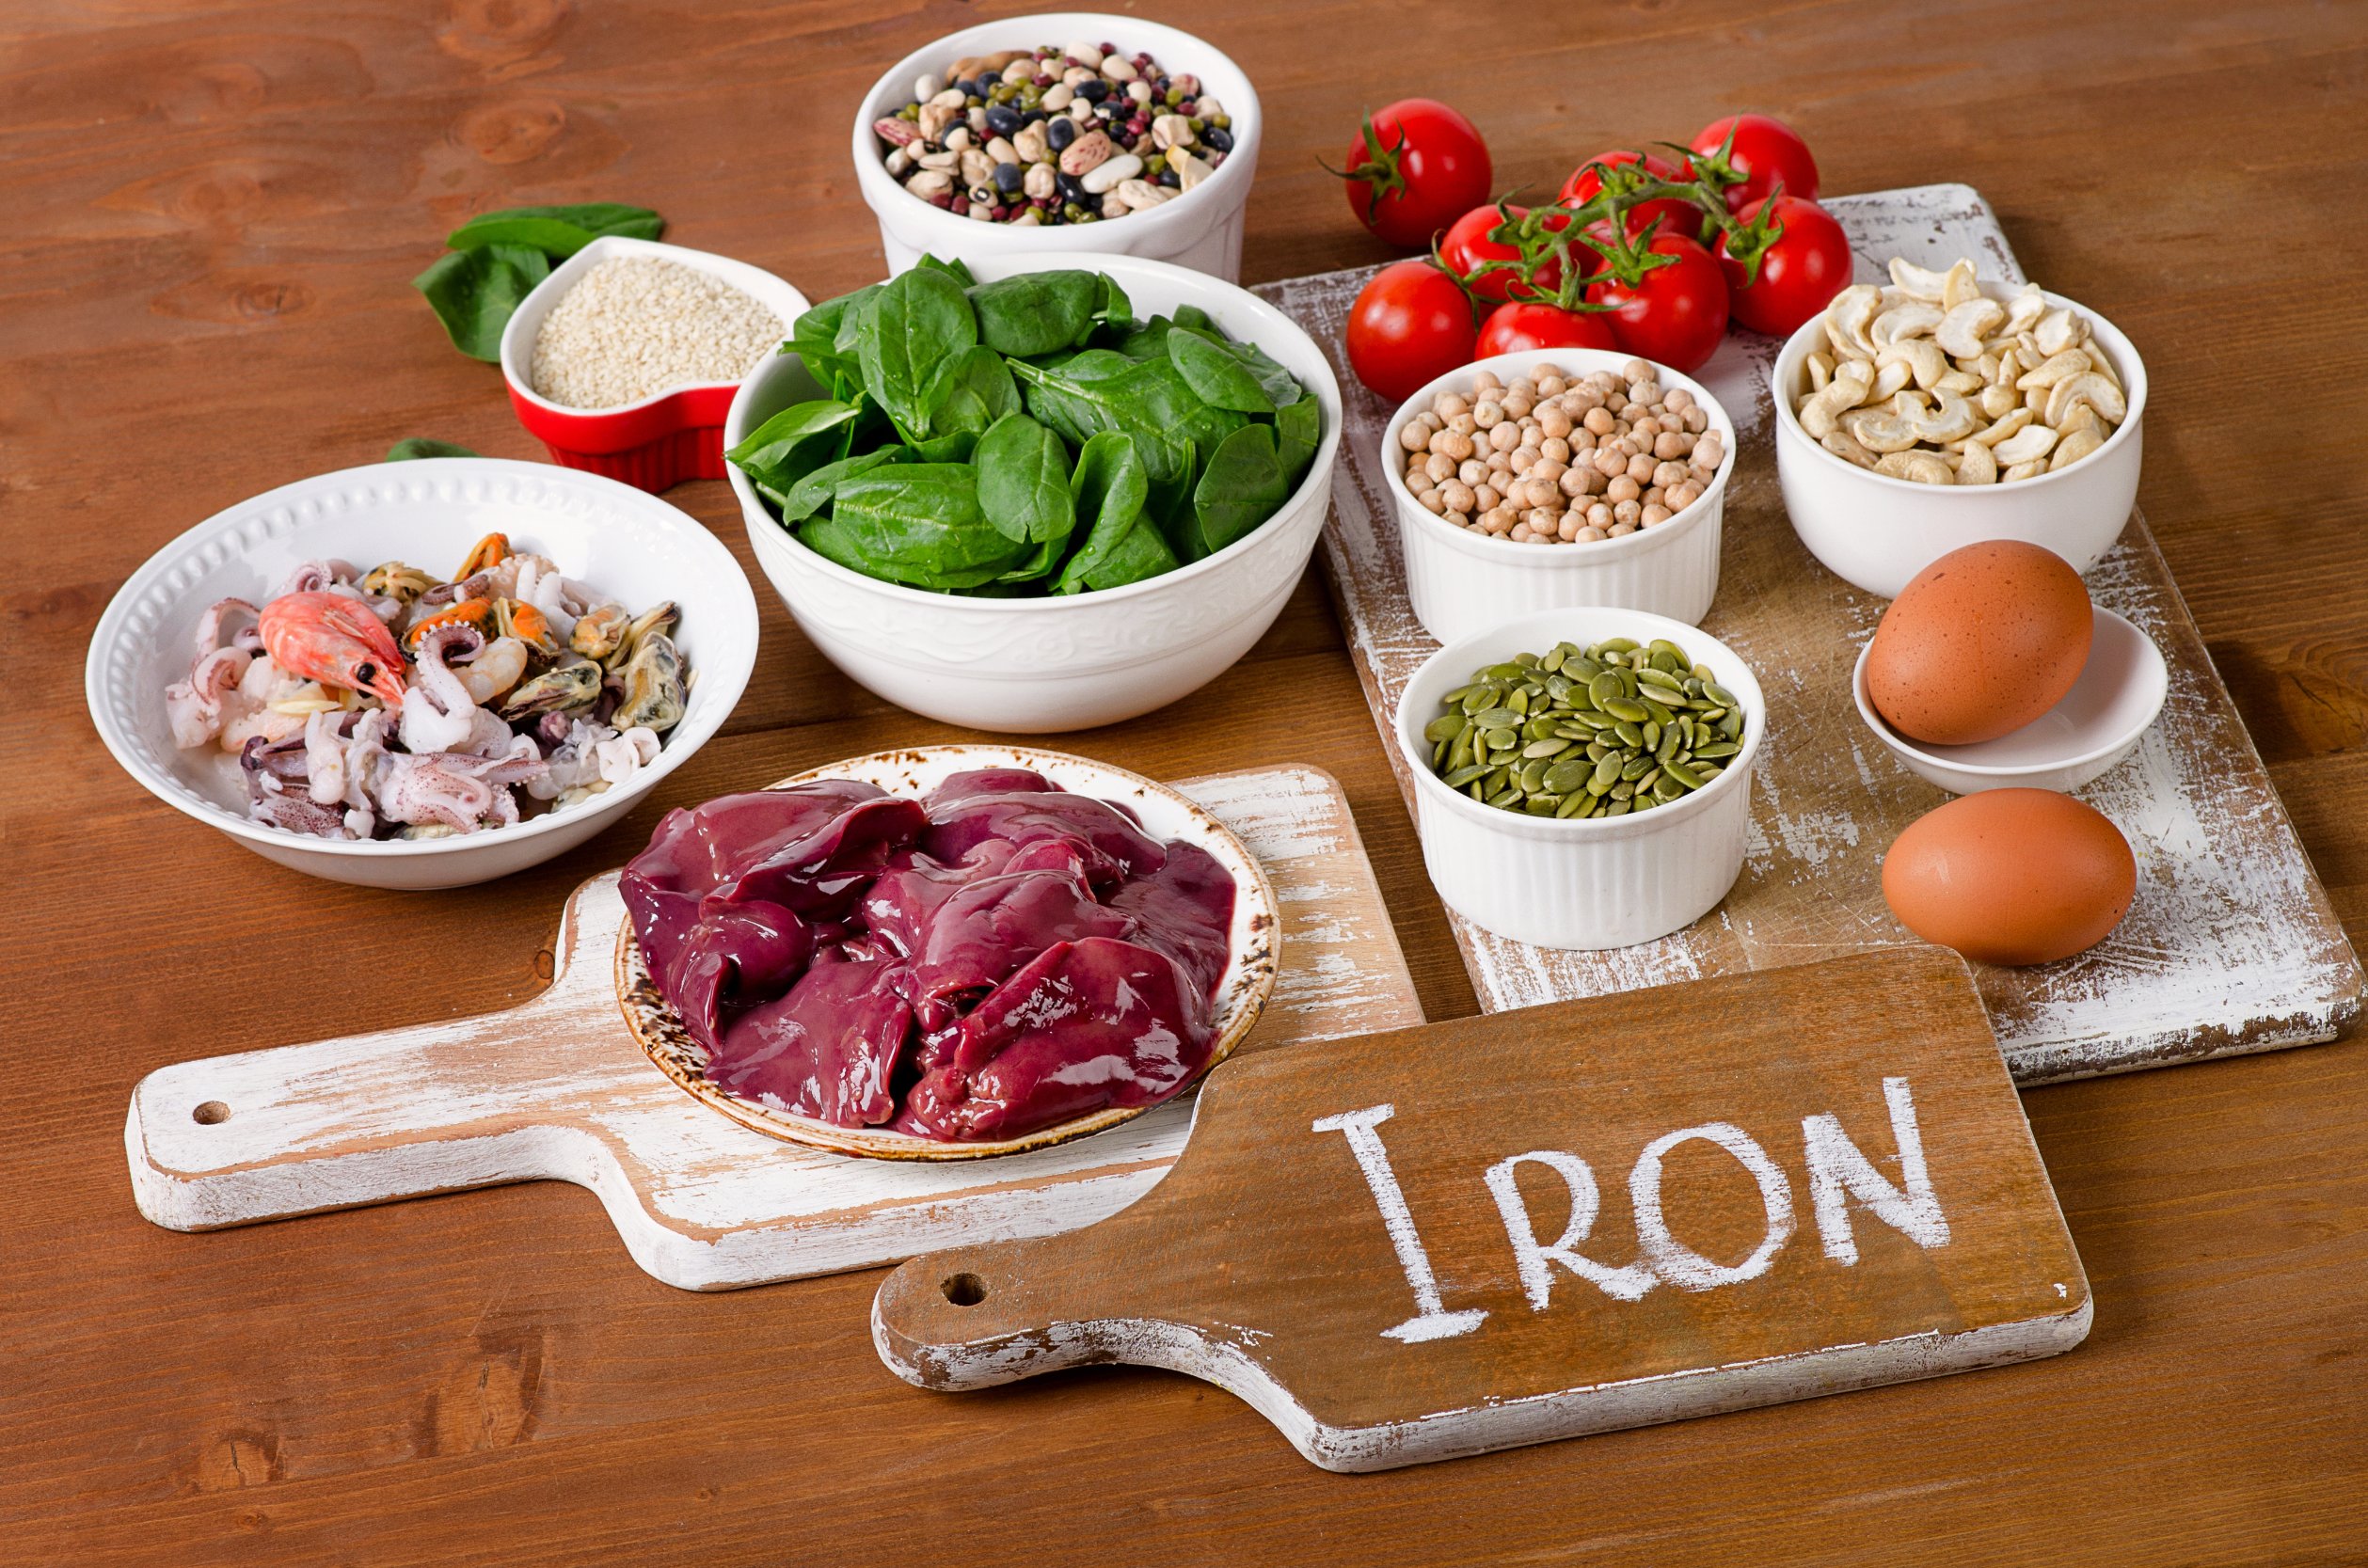 Check out our Top 10 List of Iron Rich Foods